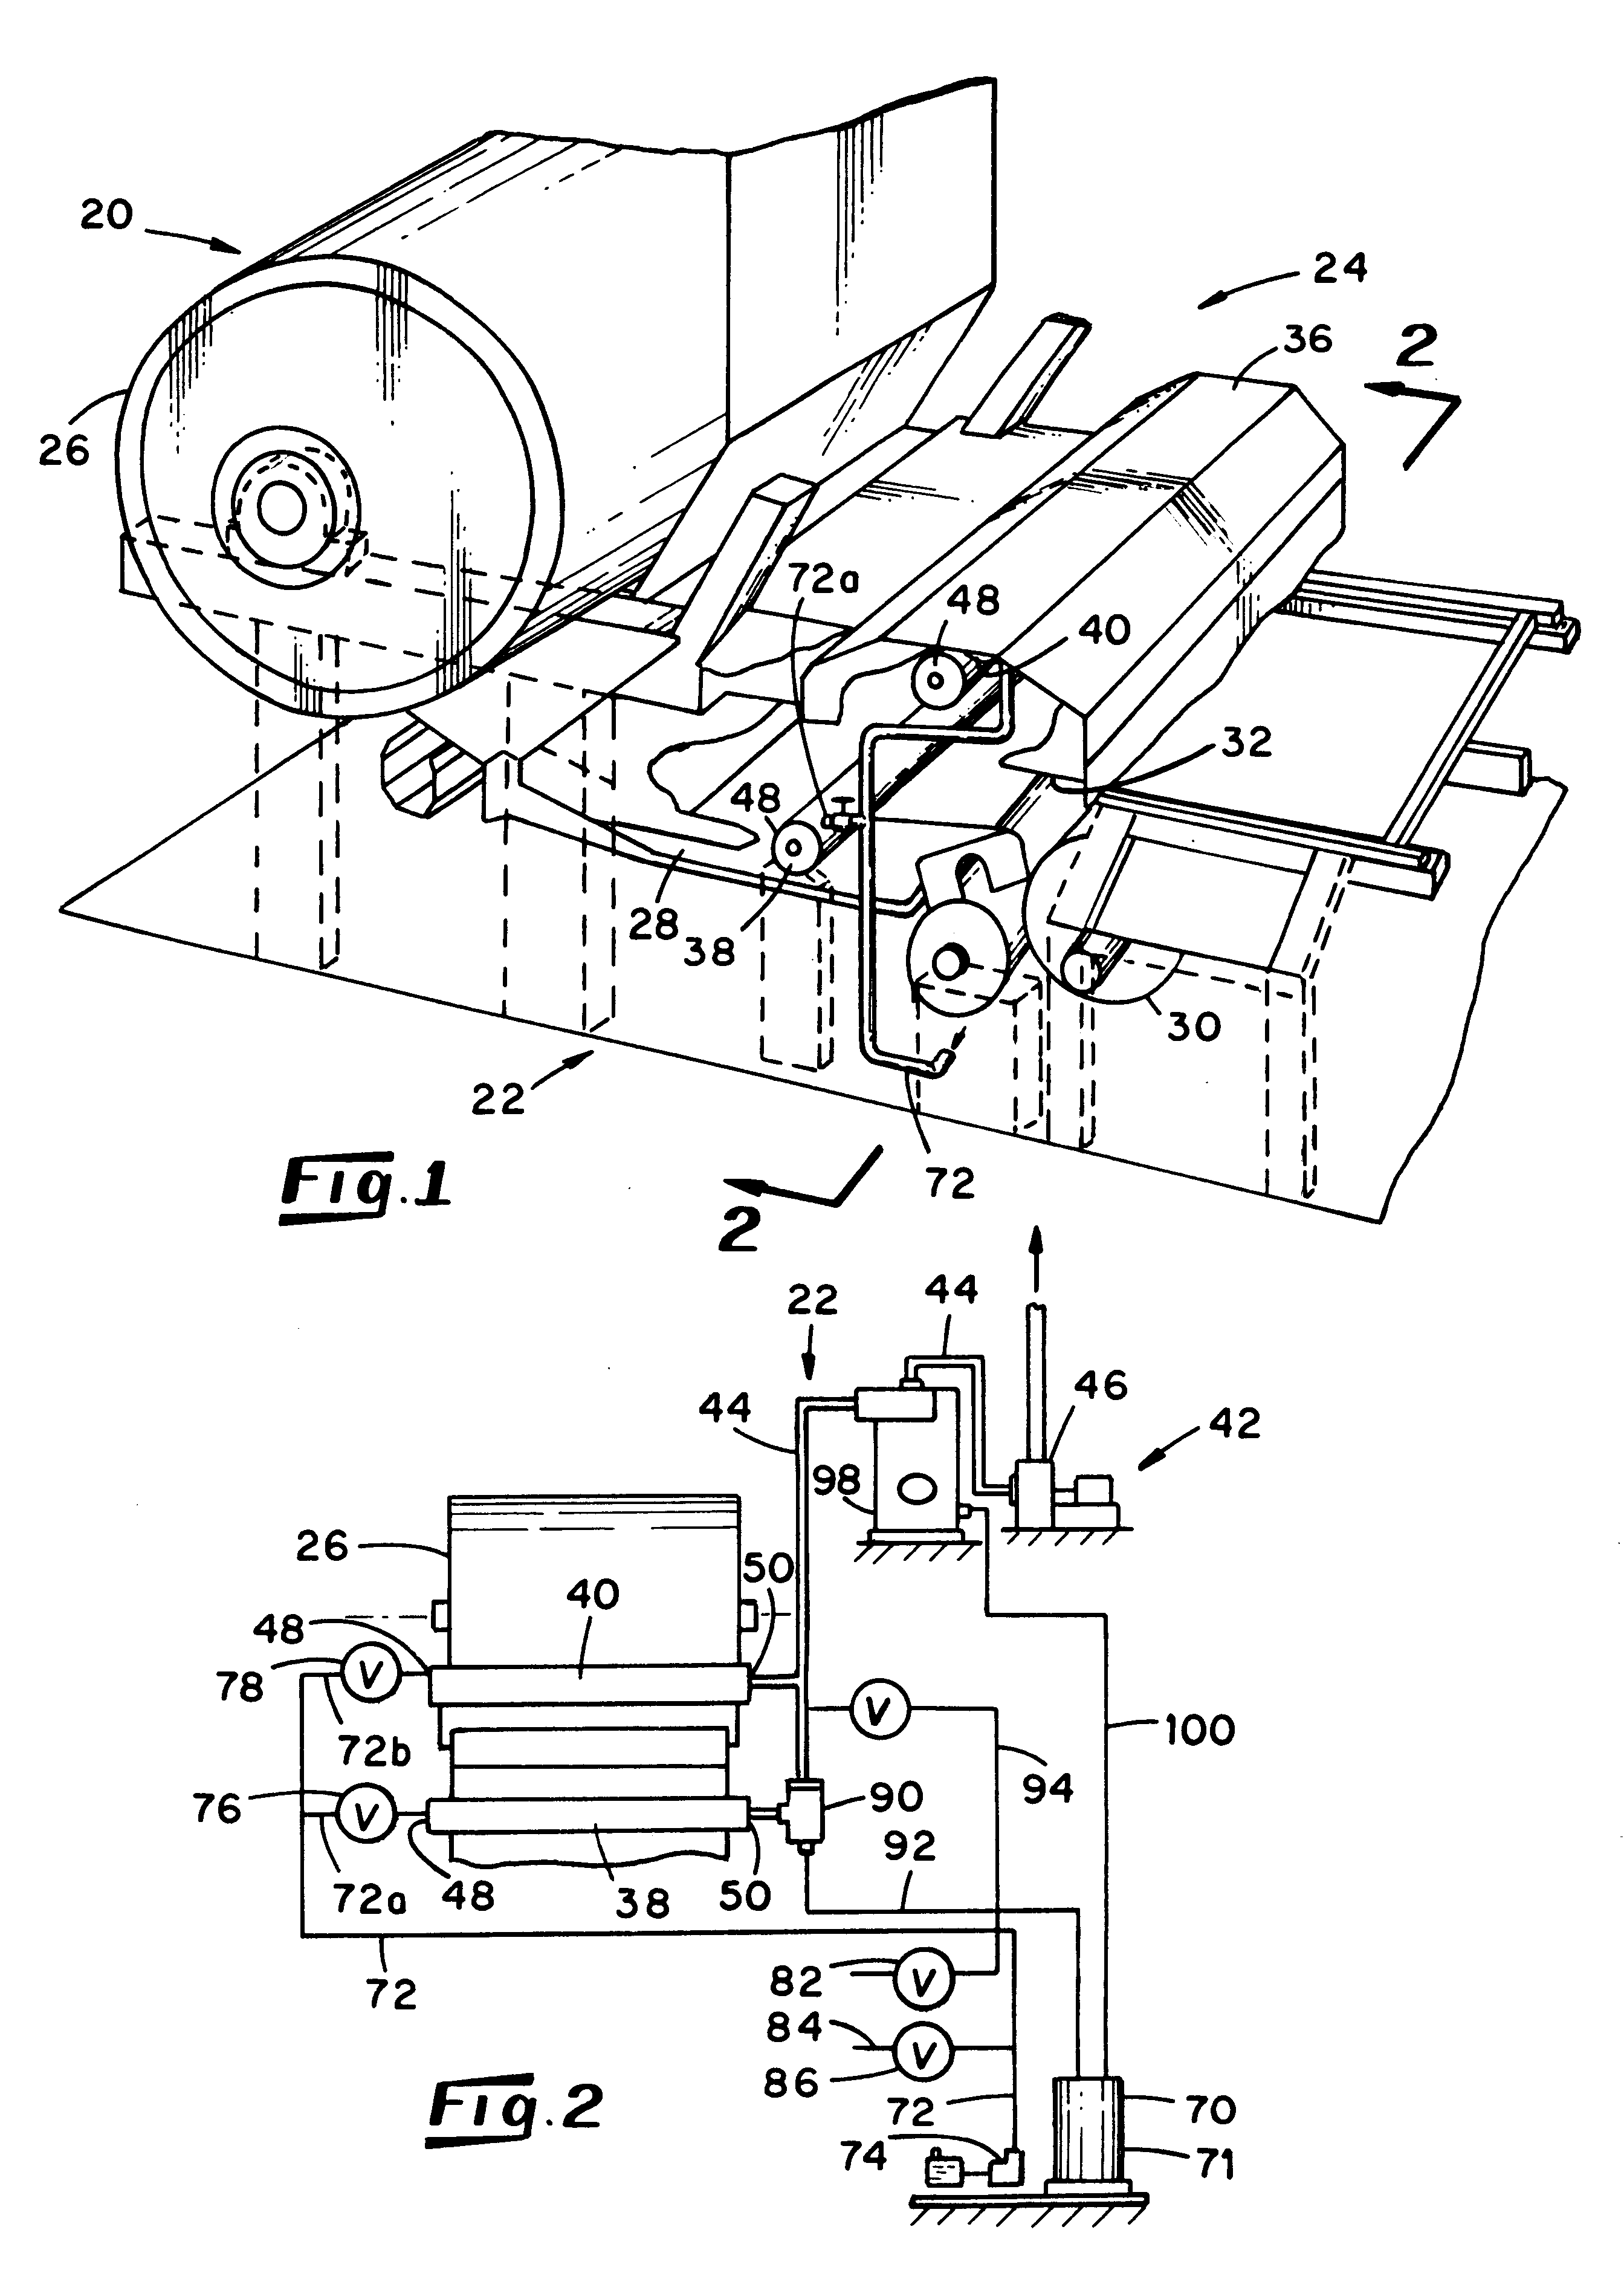 Method and system for collecting and handling dust in a papermachine environment